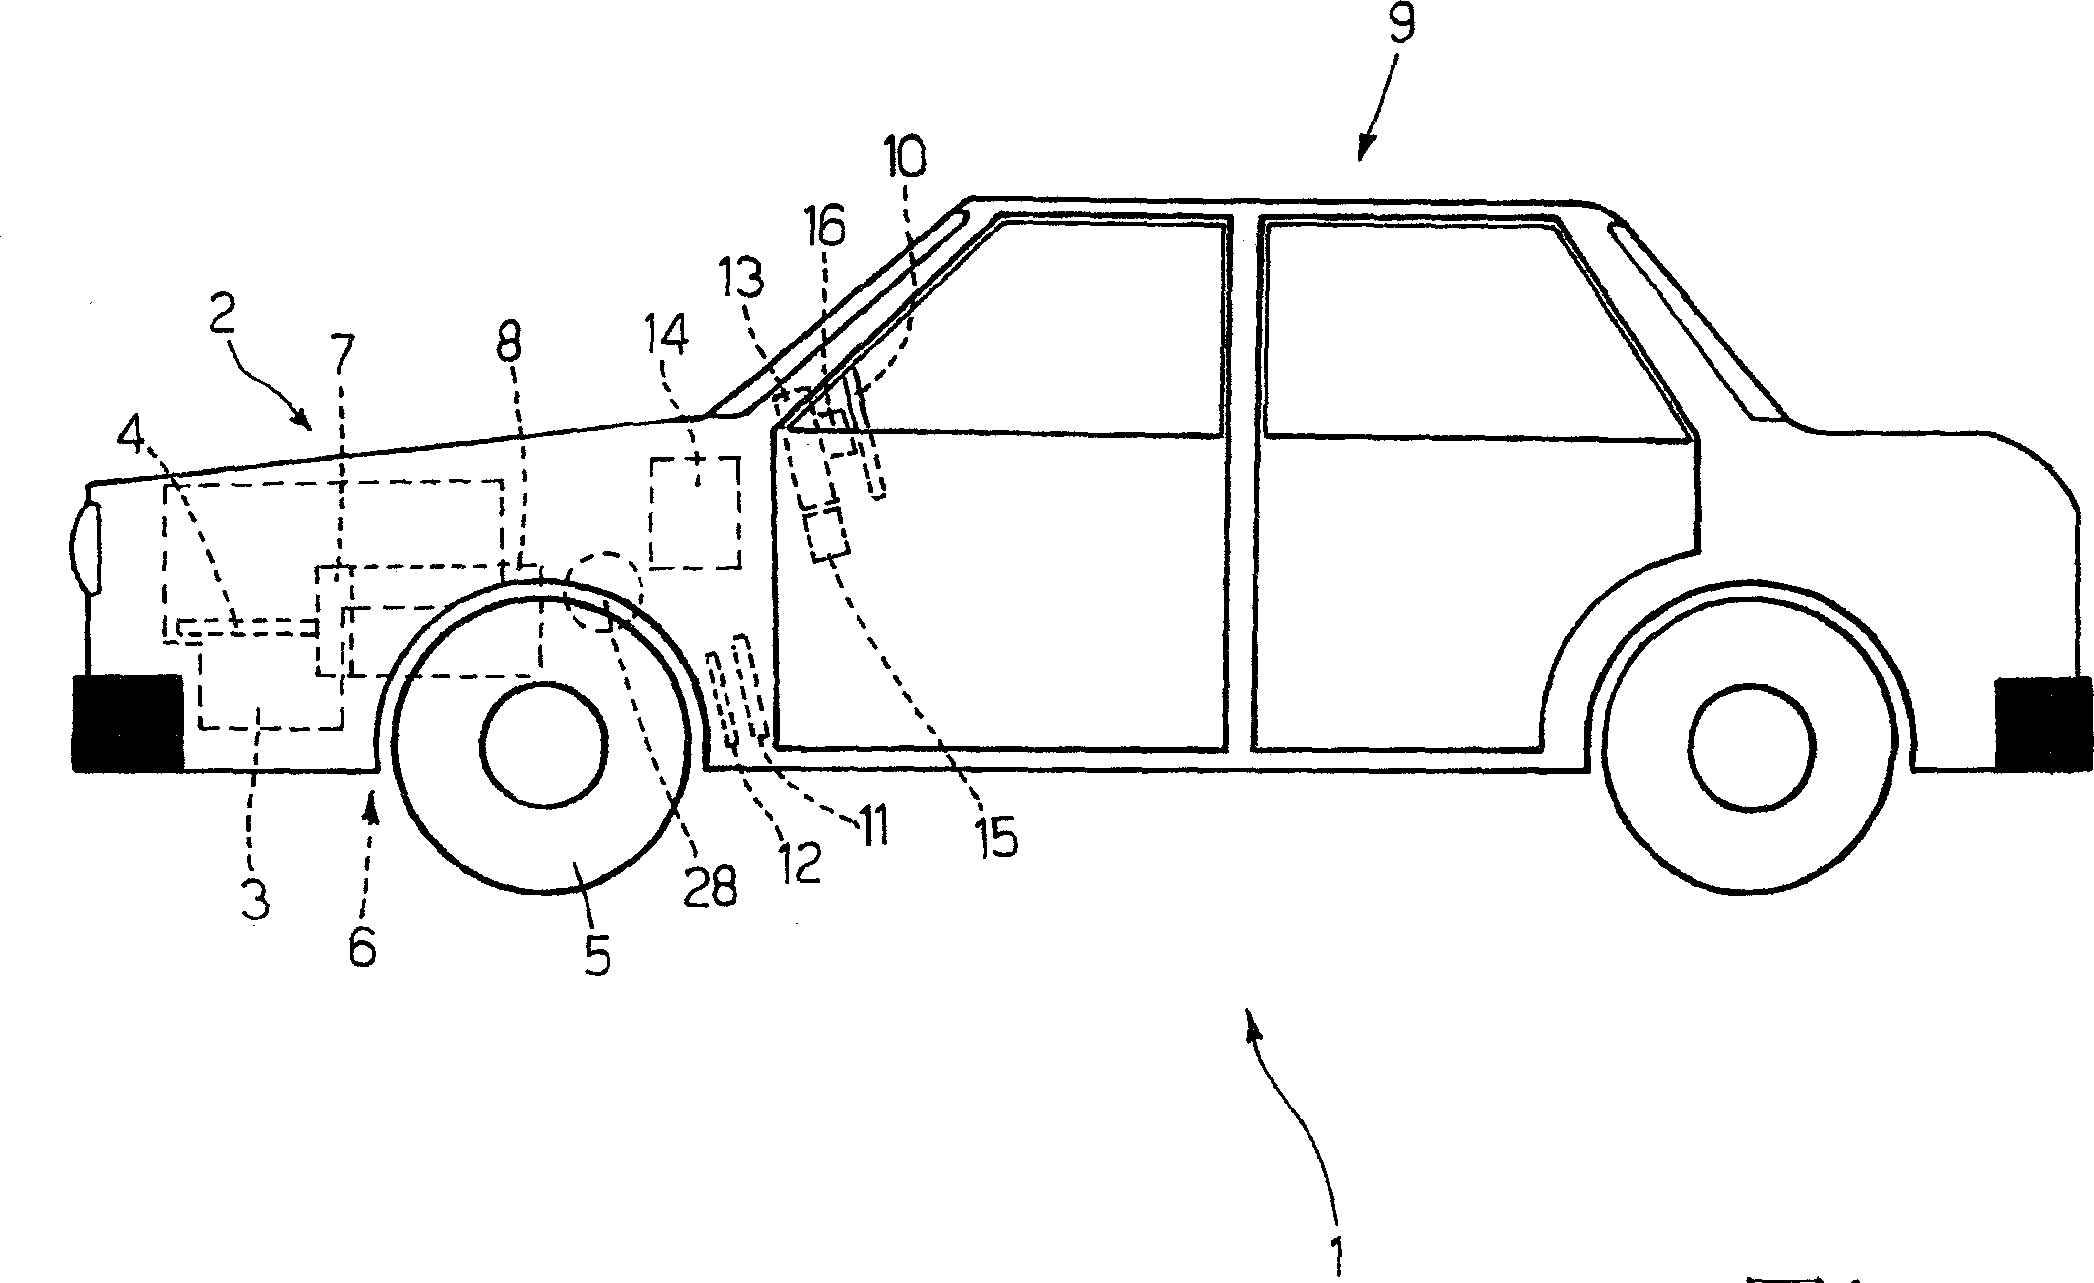 Cruise management method and device for a road vehicle